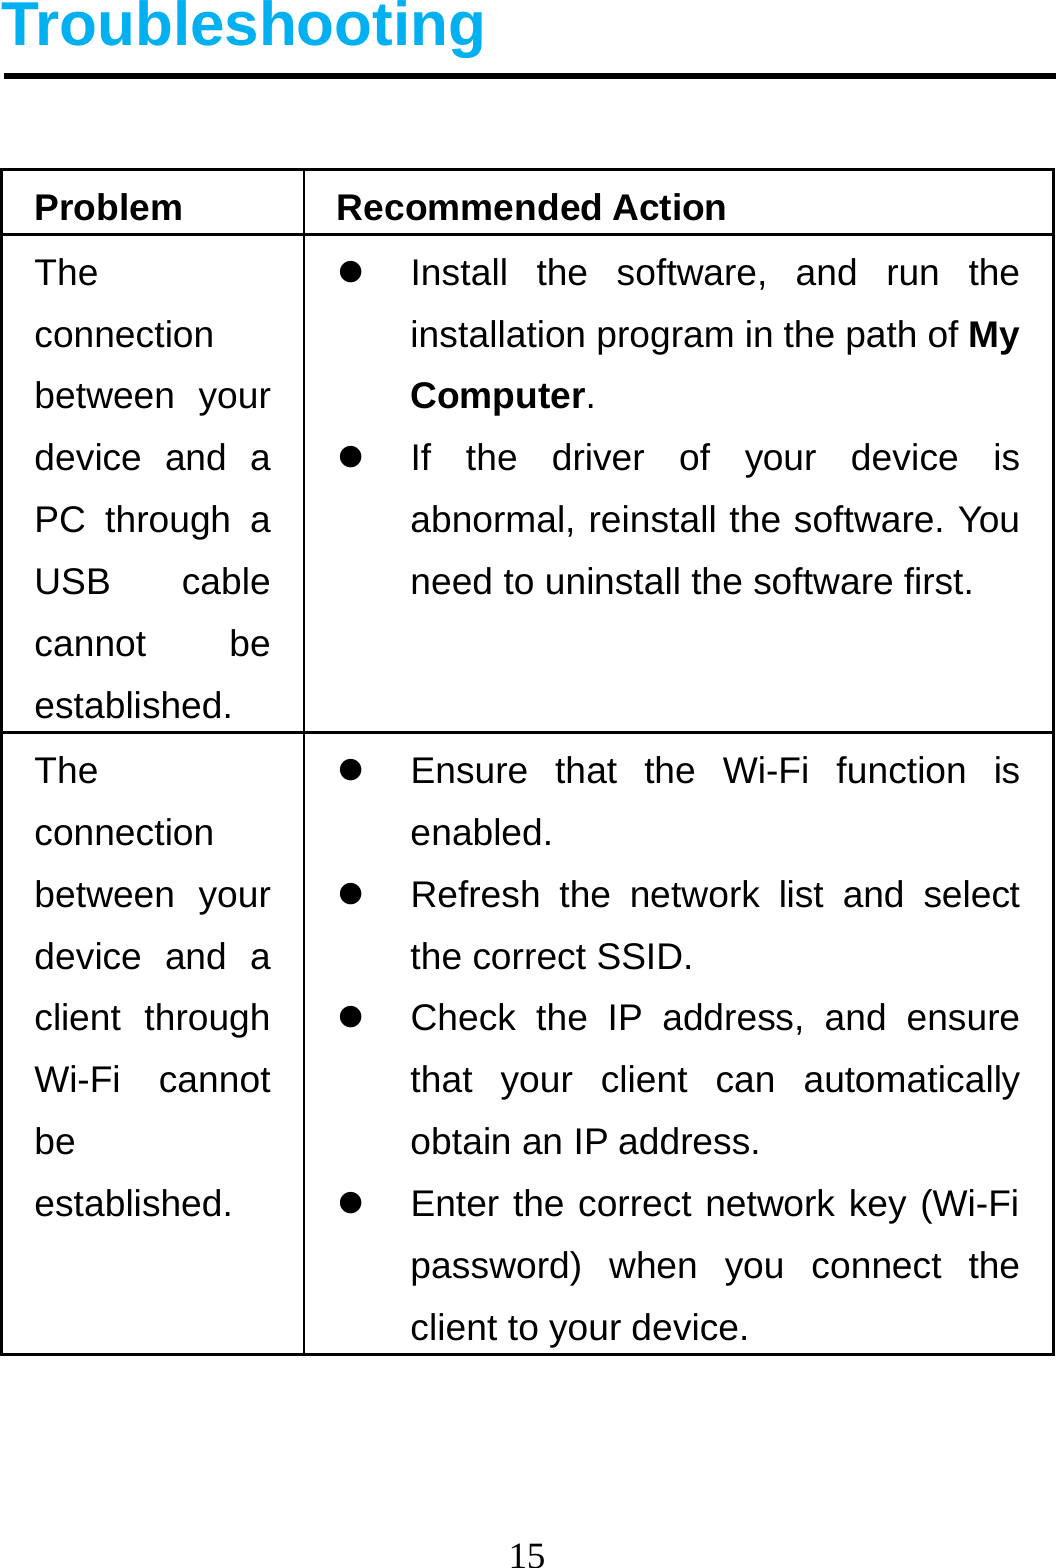 15  Troubleshooting  Problem Recommended Action The connection between your device and a PC through a USB cable cannot be established.   Install the software, and run the installation program in the path of My Computer.    If the driver of your device is abnormal, reinstall the software. You need to uninstall the software first. The connection between your device and a client through Wi-Fi cannot be established.   Ensure that the Wi-Fi function is enabled.   Refresh the network list and select the correct SSID.   Check the IP address, and ensure that your client can automatically obtain an IP address.   Enter the correct network key (Wi-Fi password) when you connect the client to your device.   